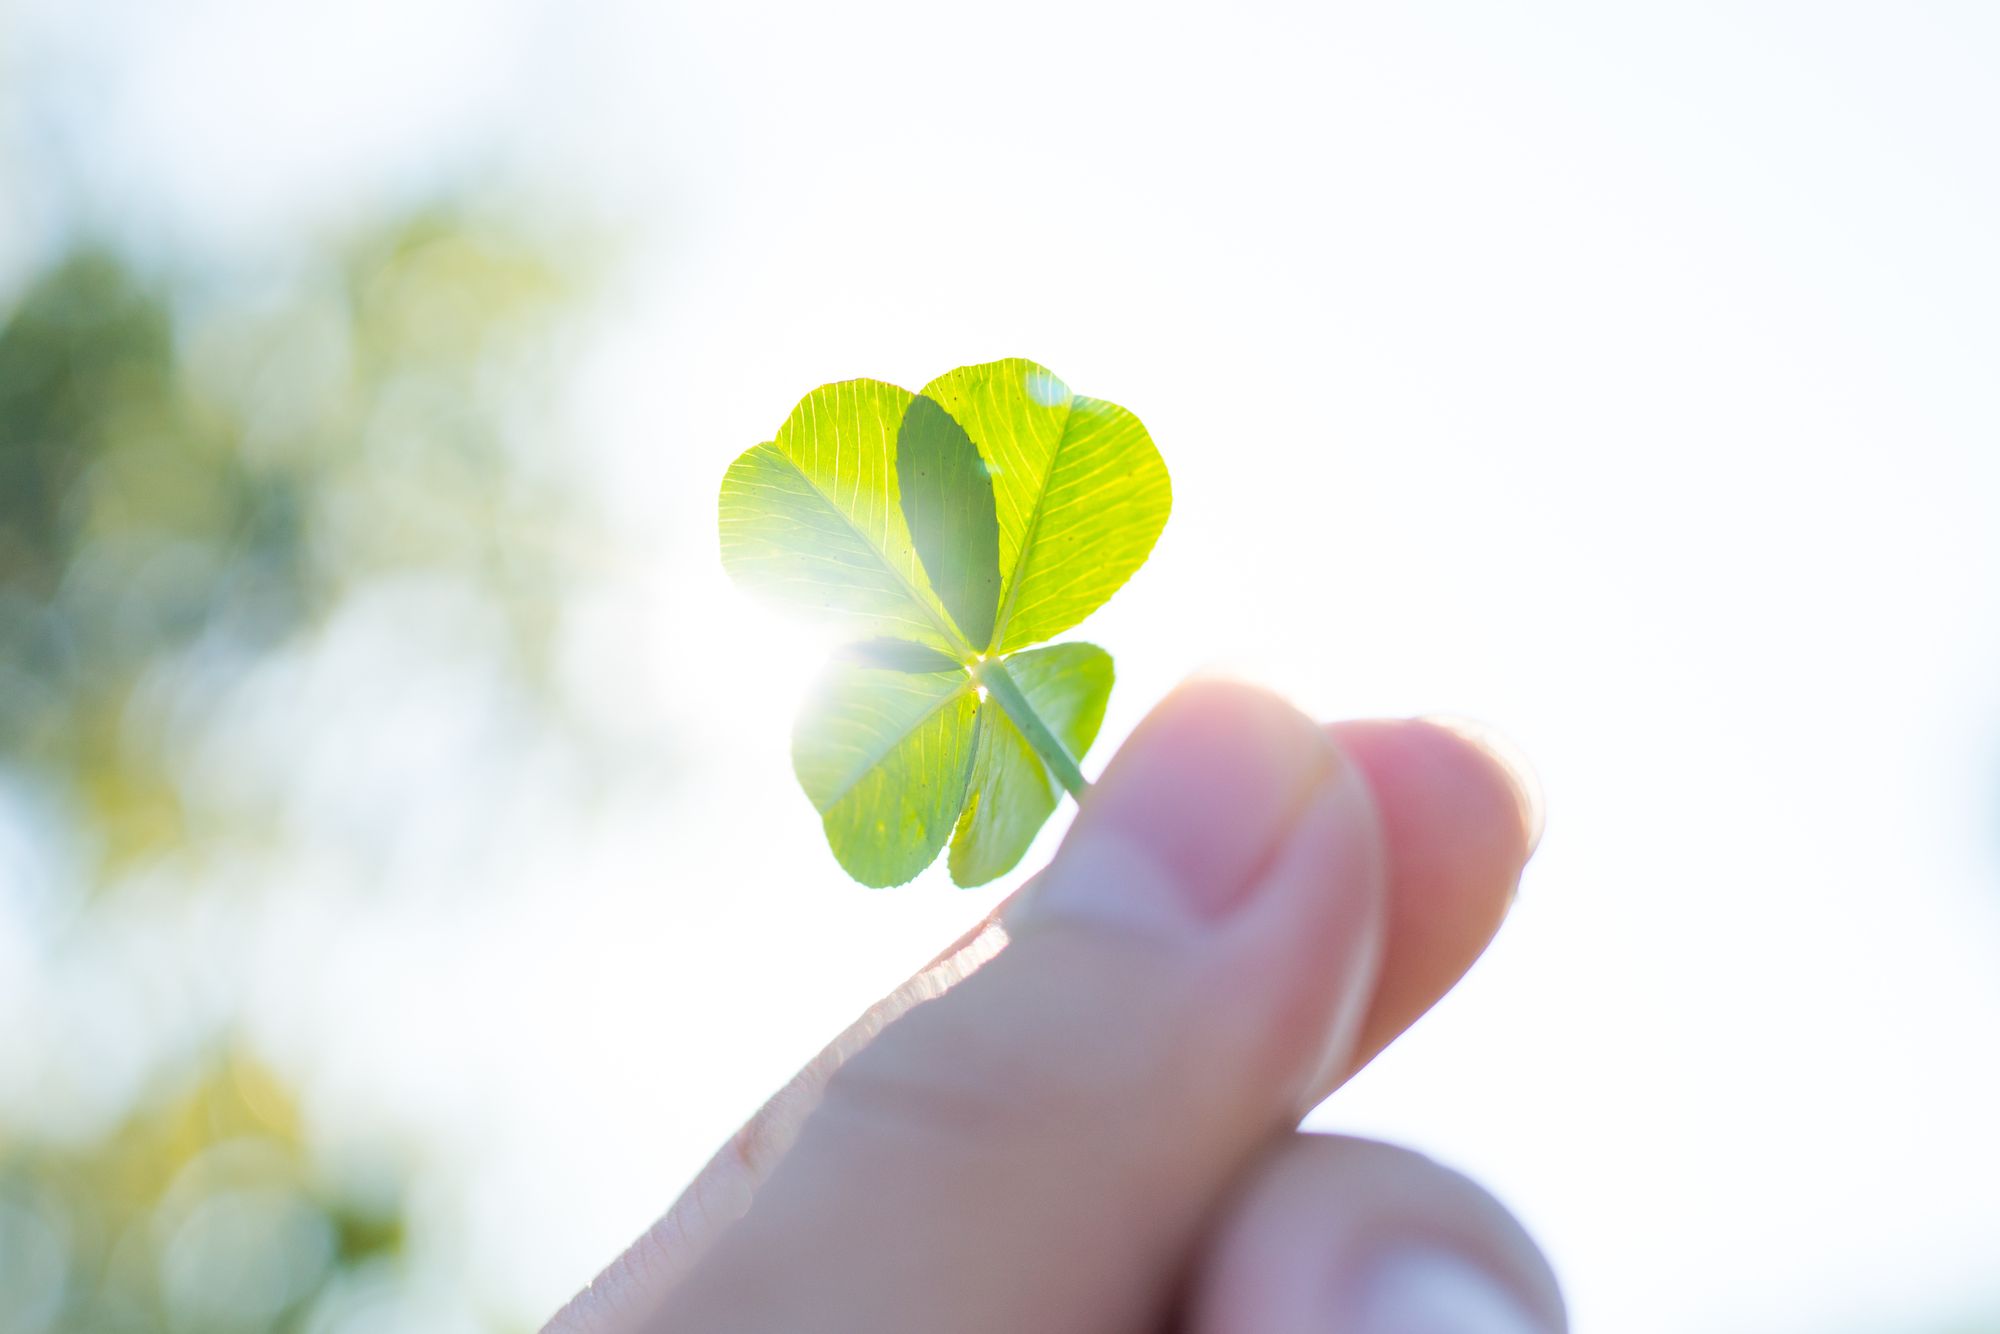 The luck of the Irish to make healthcare better